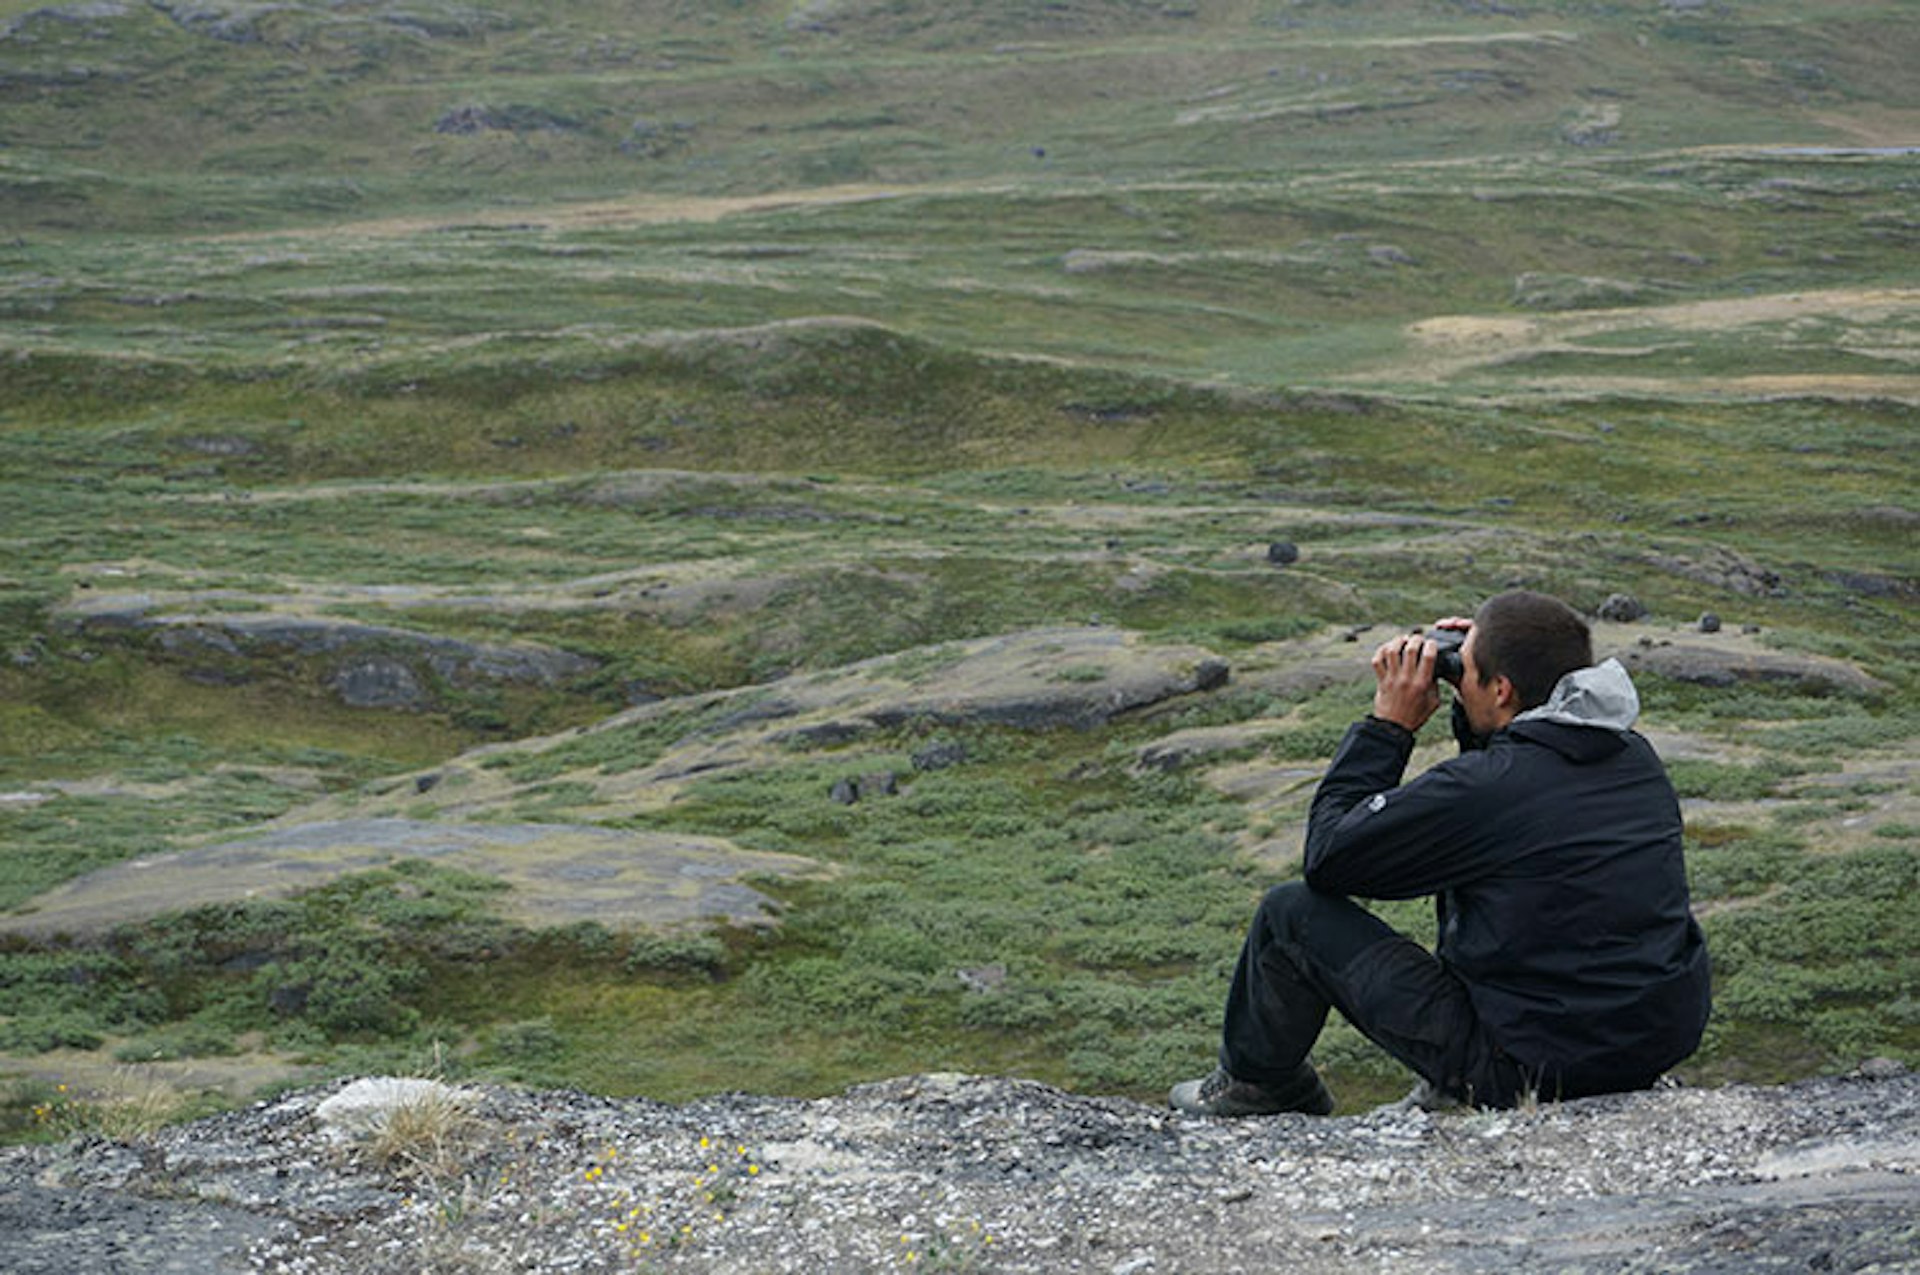 Wilderness guide Jens-Pavis Brandt scours the landscape for the elusive muskox. Image by Anita Isalska / Lonely Planet